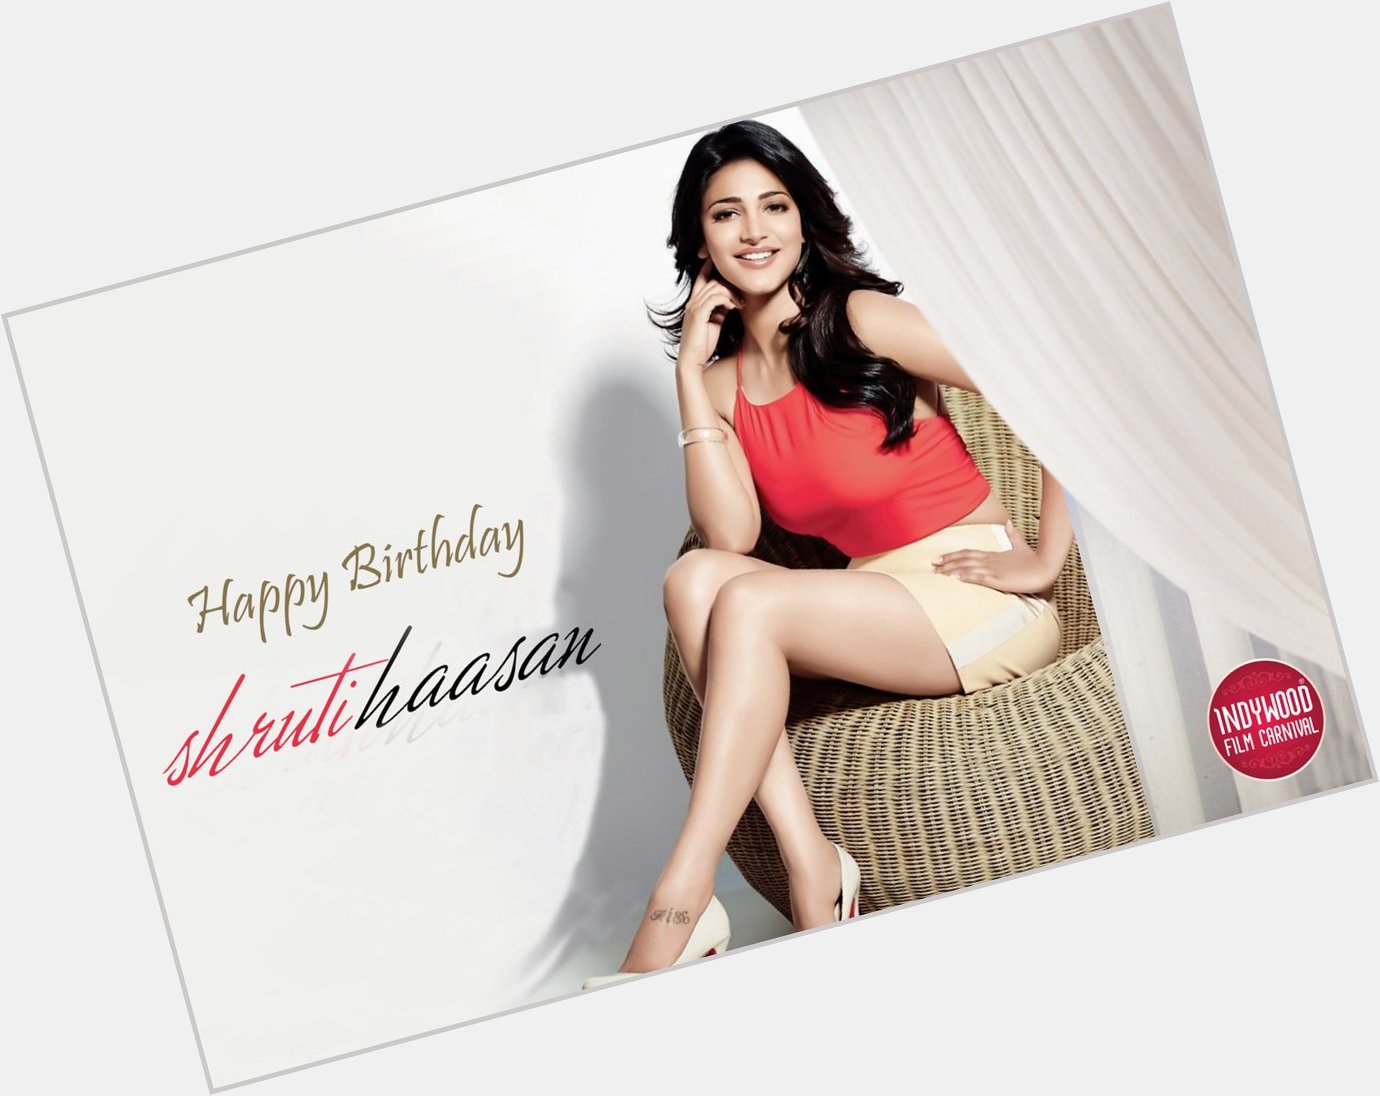 Indywood wishes a Happy Birthday to the Gorgeous Actress & Singer Shruti Haasan    